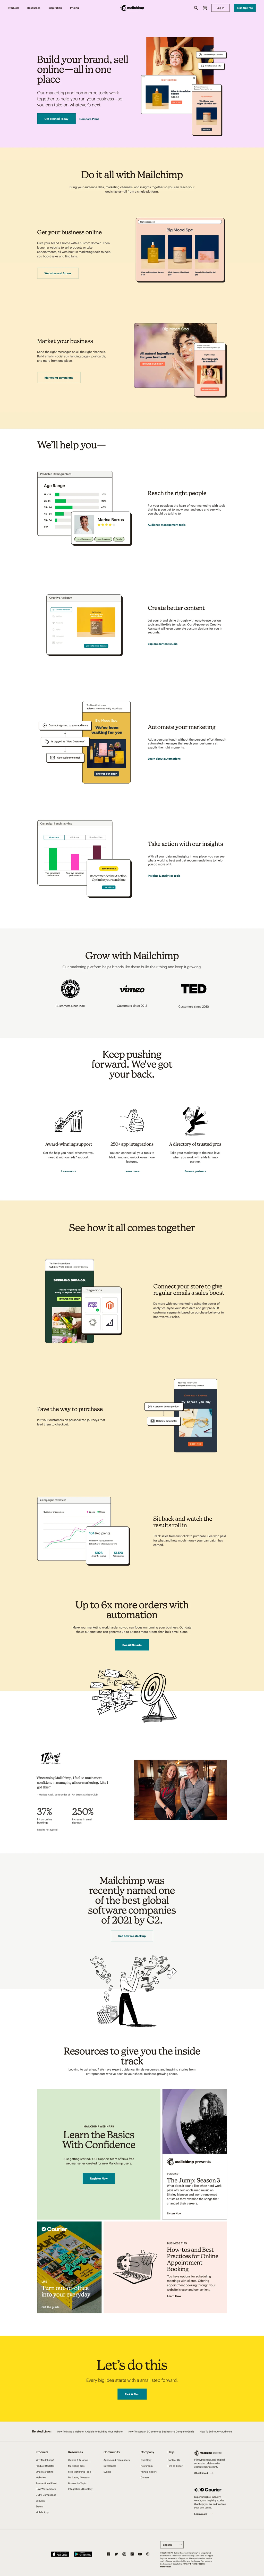 Mailchimp Landing Page Example: Build your brand, sell online—all in one place. Our marketing and commerce tools work together to help you run your business—so you can take on whatever’s next.